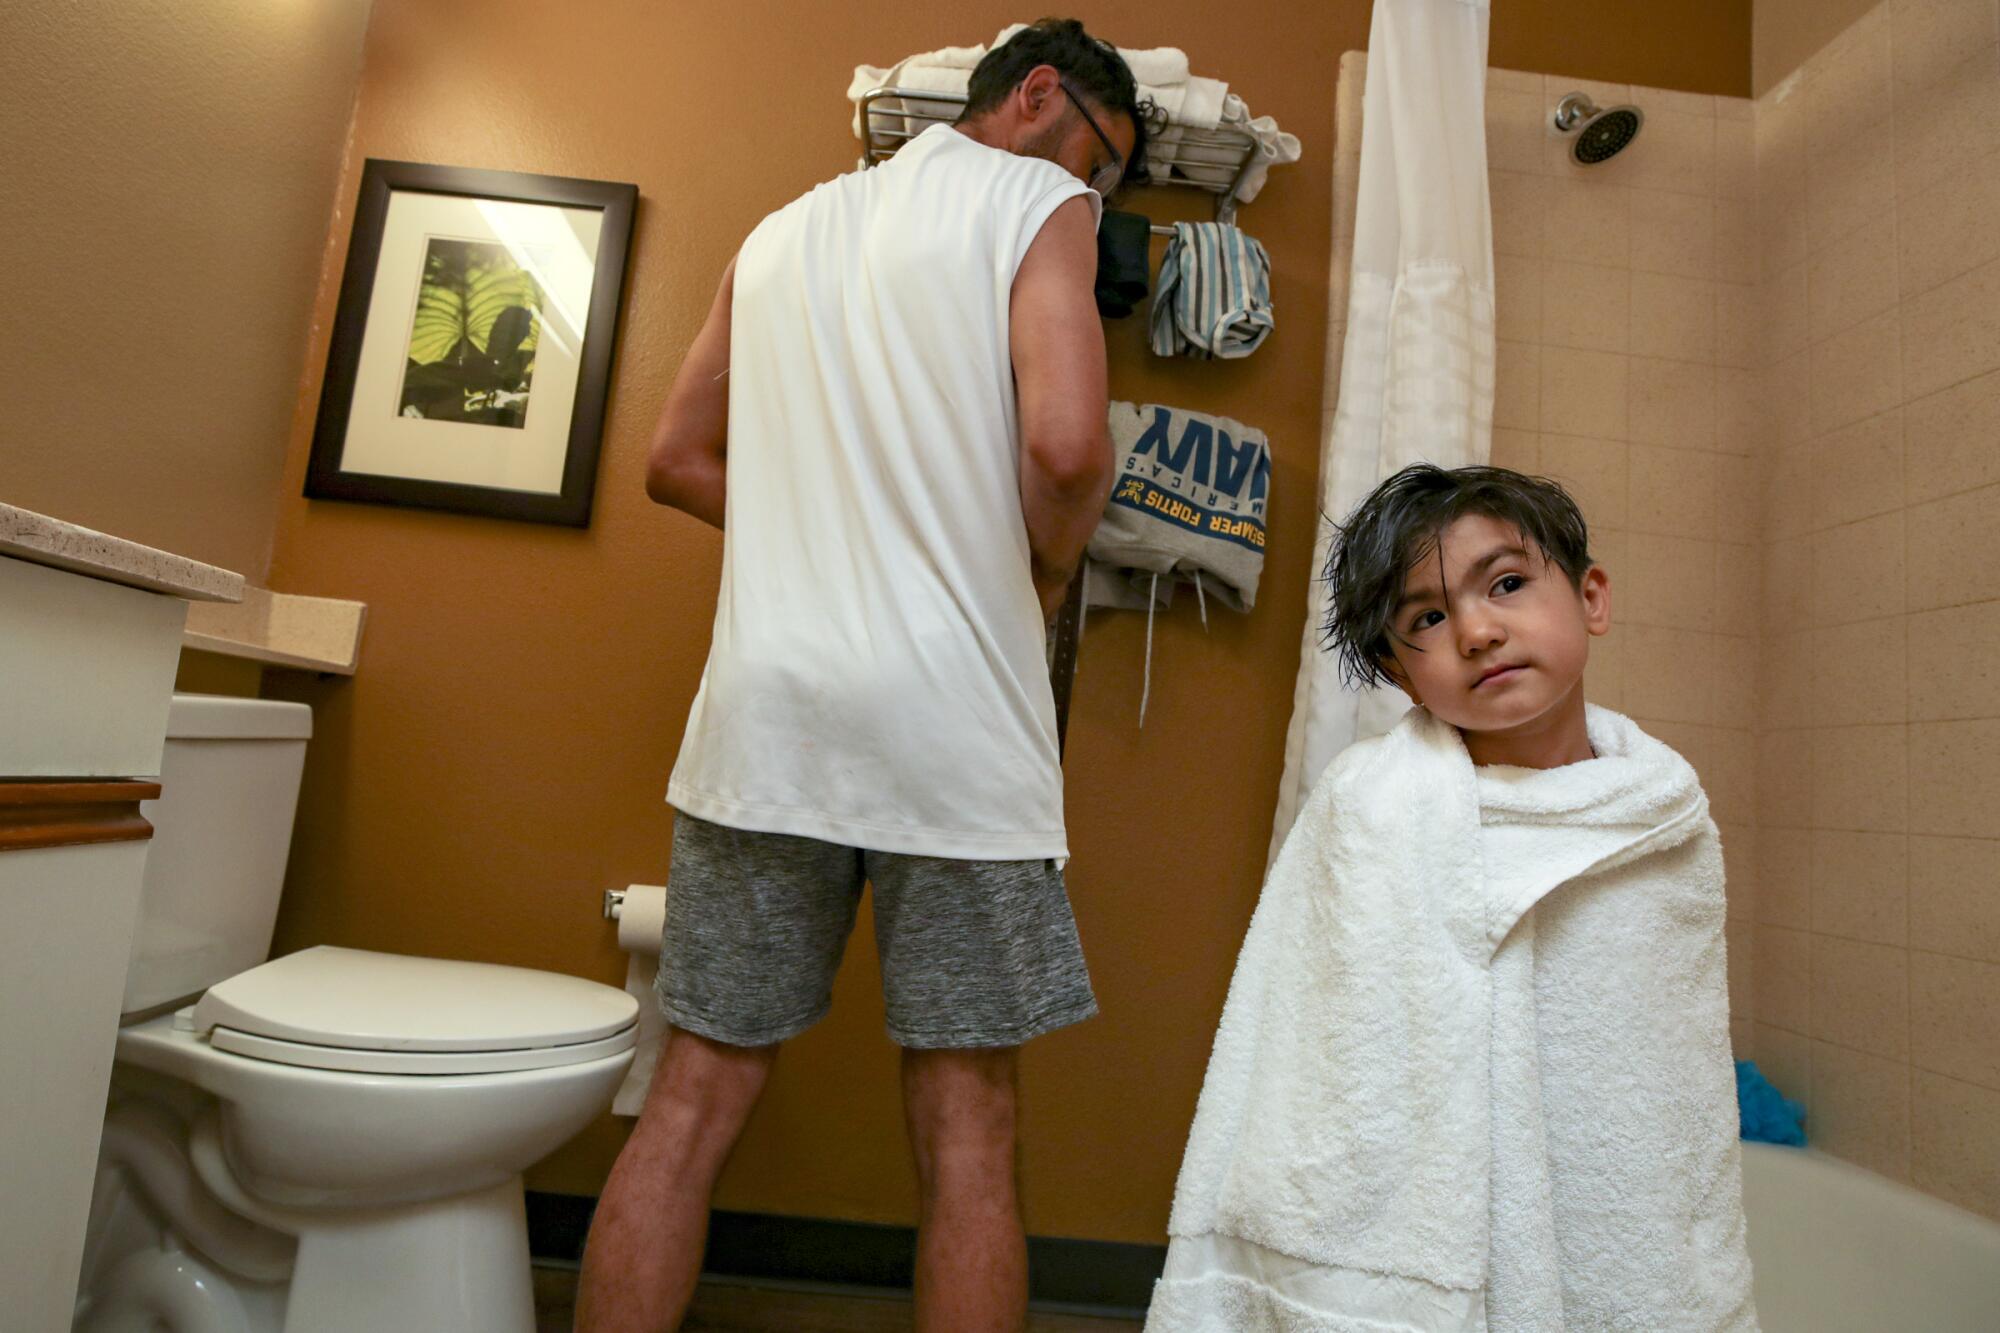 Zabih Khan bathes his 4-year-old brother Mojib at a hotel in San Diego.